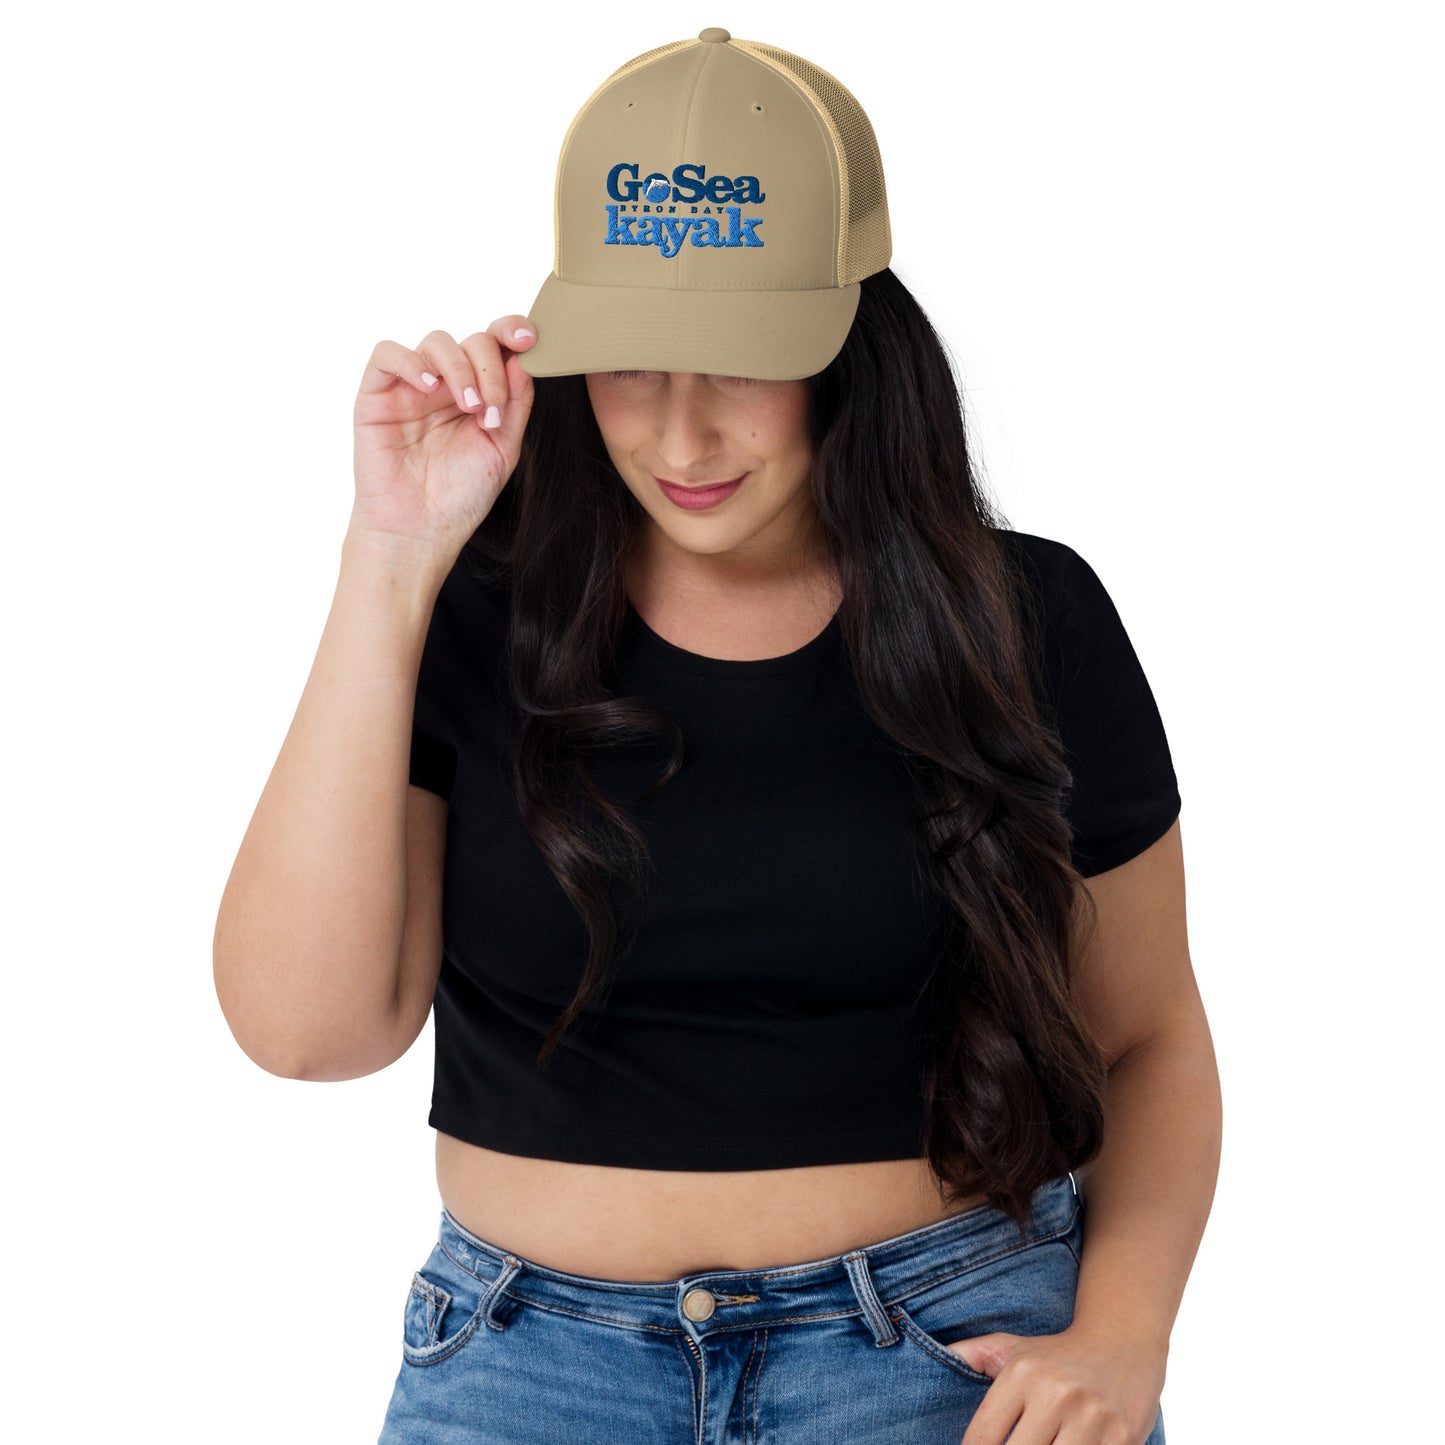  Trucker Cap - Khaki - Front view - being warn by woman with her head down and one hand holding the brim - Go Sea Kayak Byron Bay logo on front - Genuine Byron Bay Merchandise | Produced by Go Sea Kayak Byron Bay 